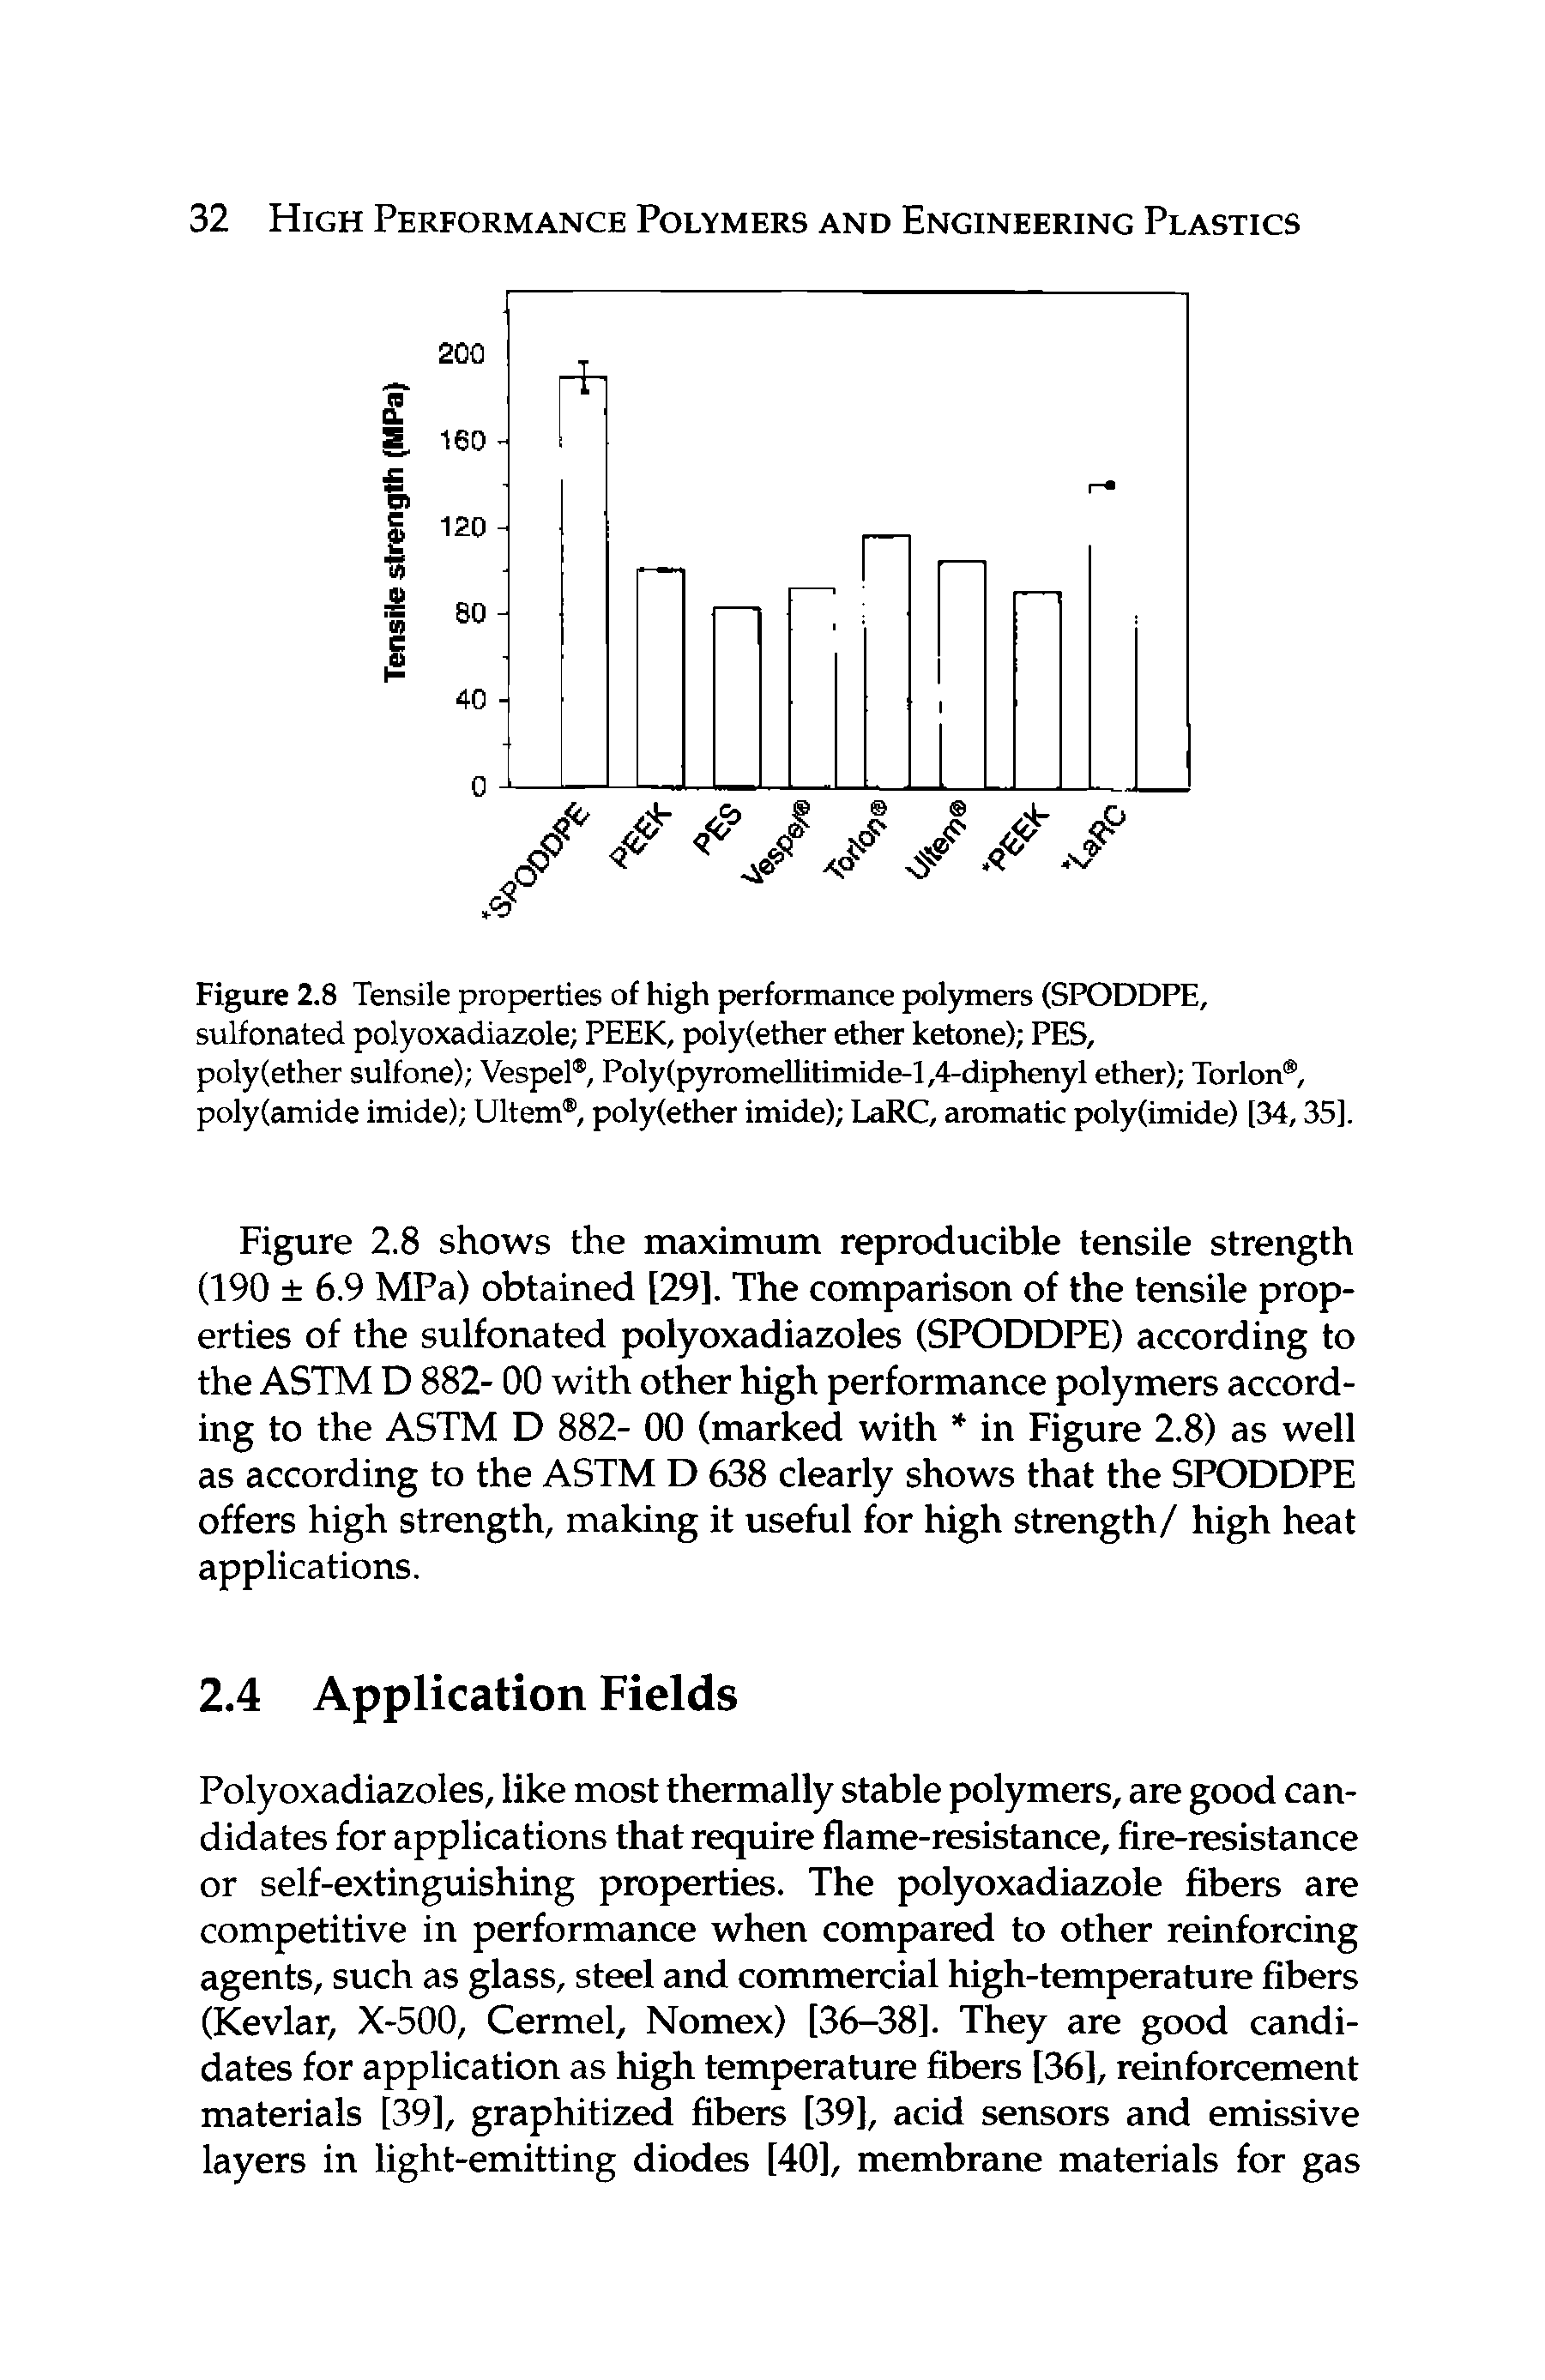 Figure 2.8 Tensile properties of high performance polymers (SPODDPE, sulfonated polyoxadiazole PEEK, polyfether ether ketone) PES, poly(ether sulfone) Vespel , Poly(pjromellitimide-l,4-diphenyl ether) Torlon , poly(amide imide) Ultem , polyfether imide) LaRC, aromatic poly(imide) [34,35],...